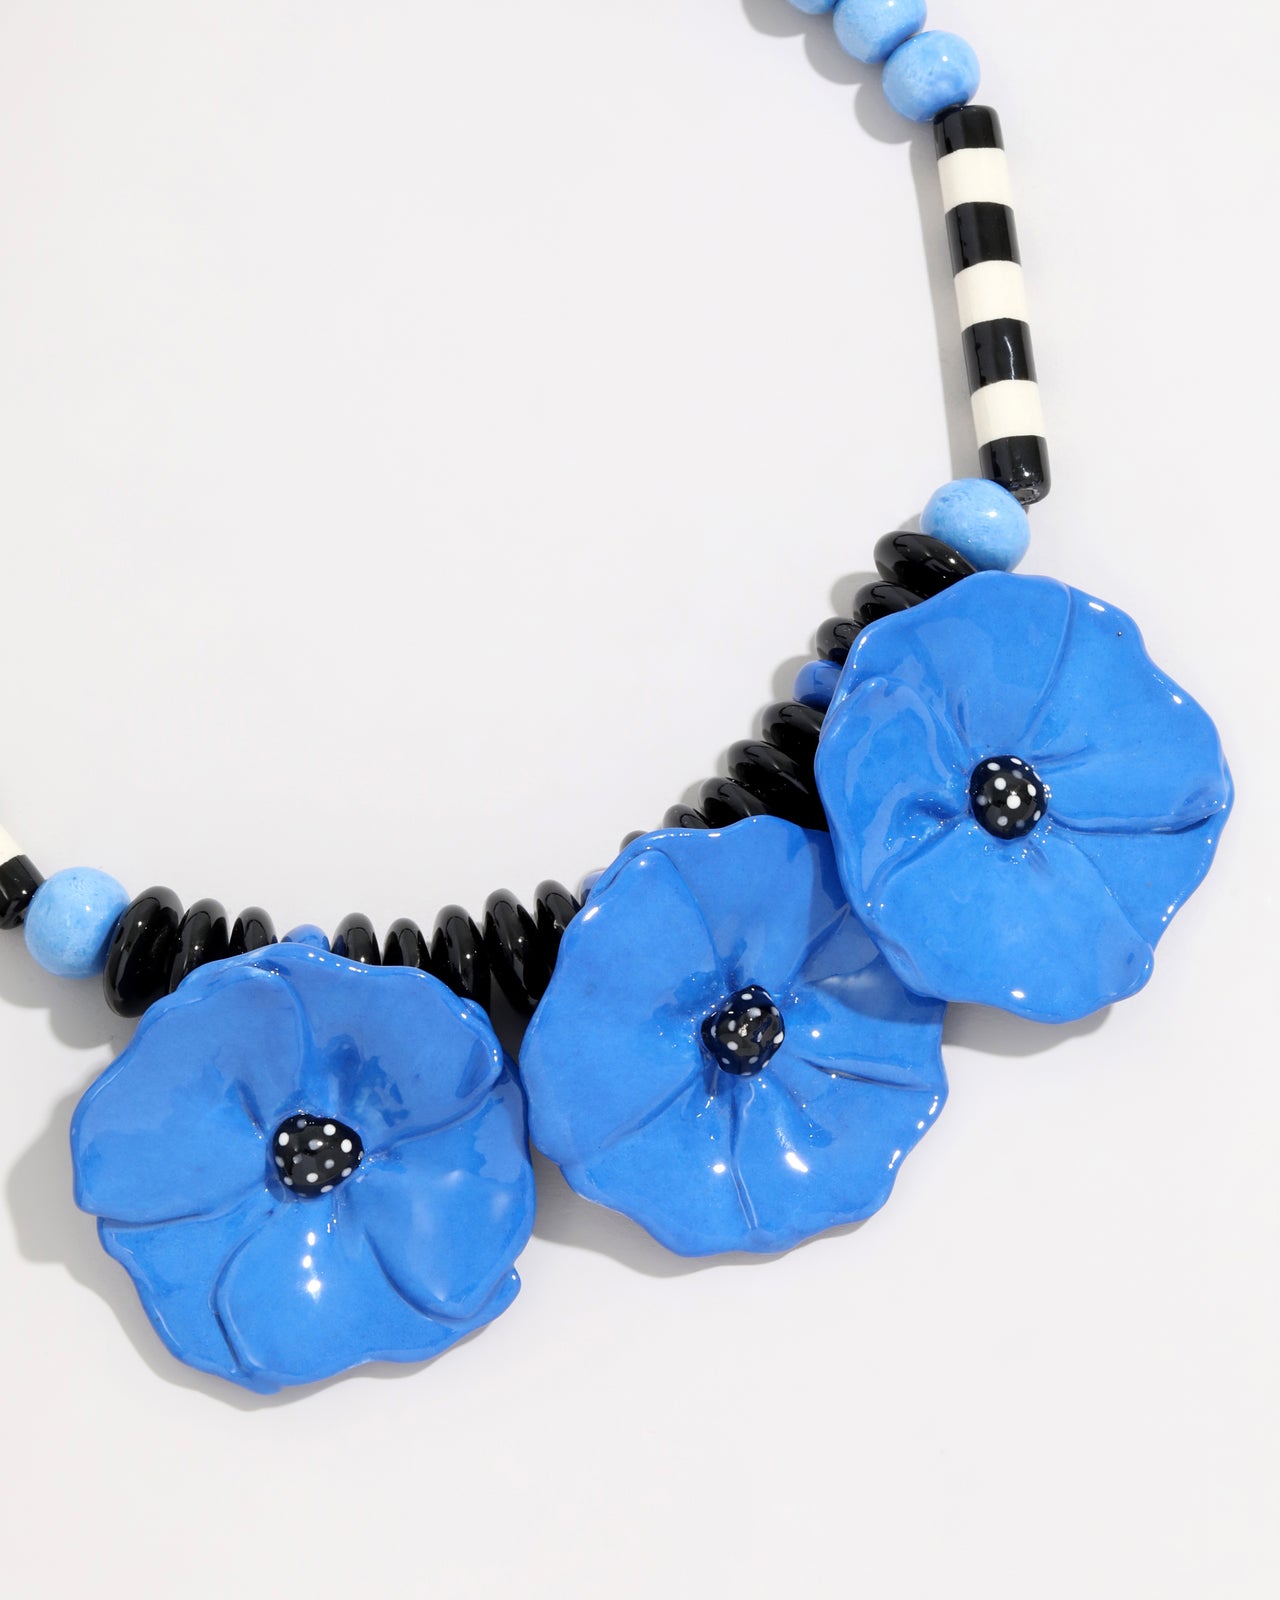 Vintage 1980s Candace Loweed Hand Blown Floral Bib Necklace - Photo 2